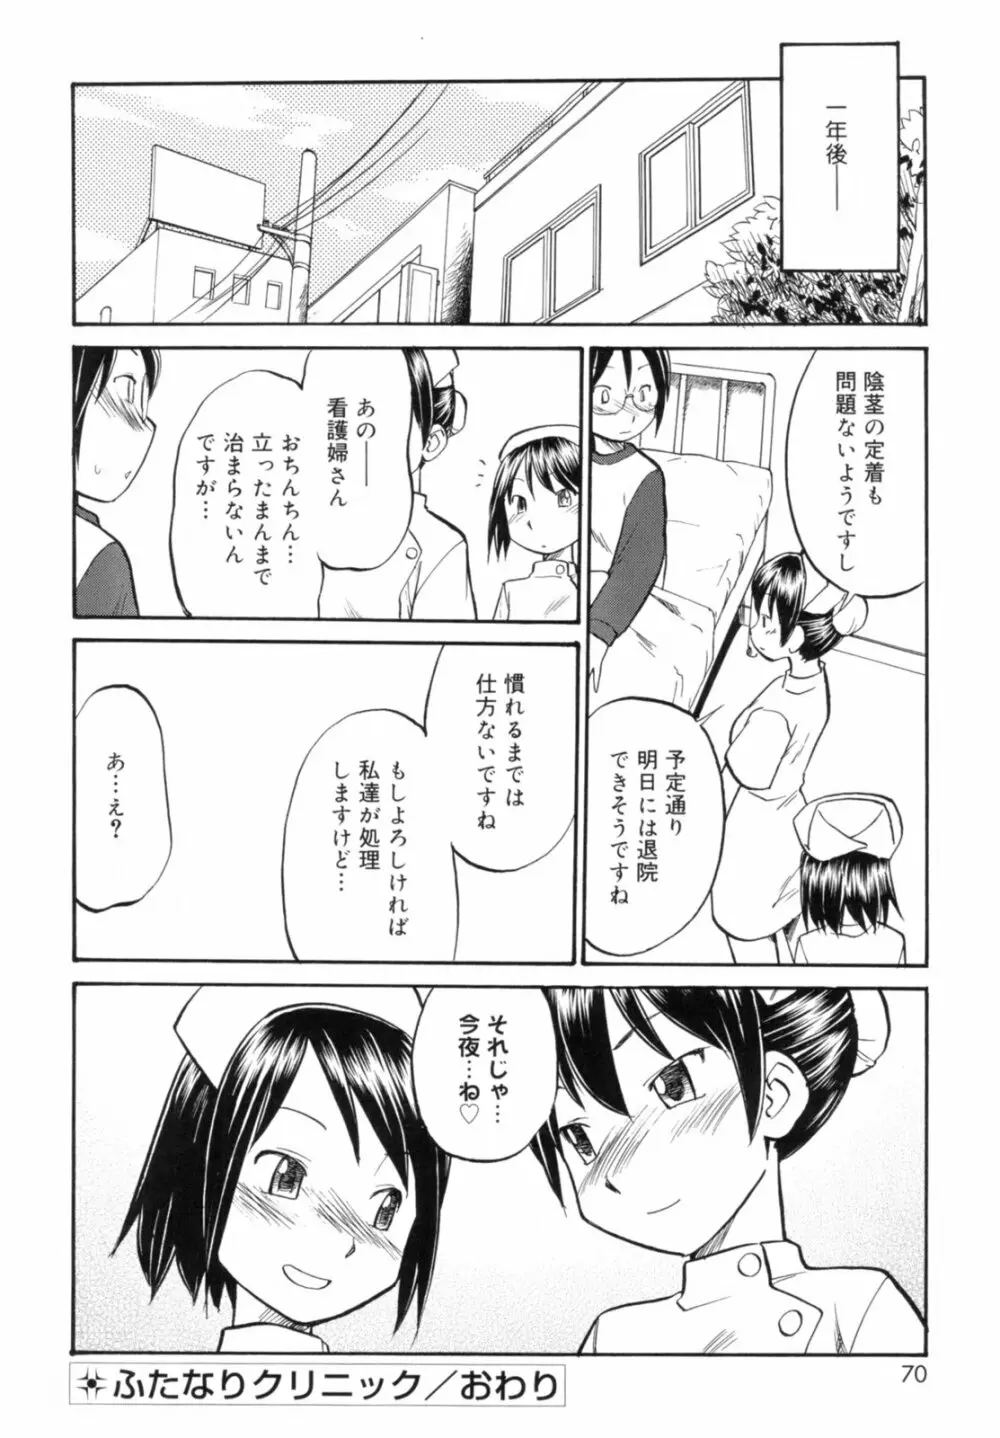 Read me　リード・ミー！ Page.72